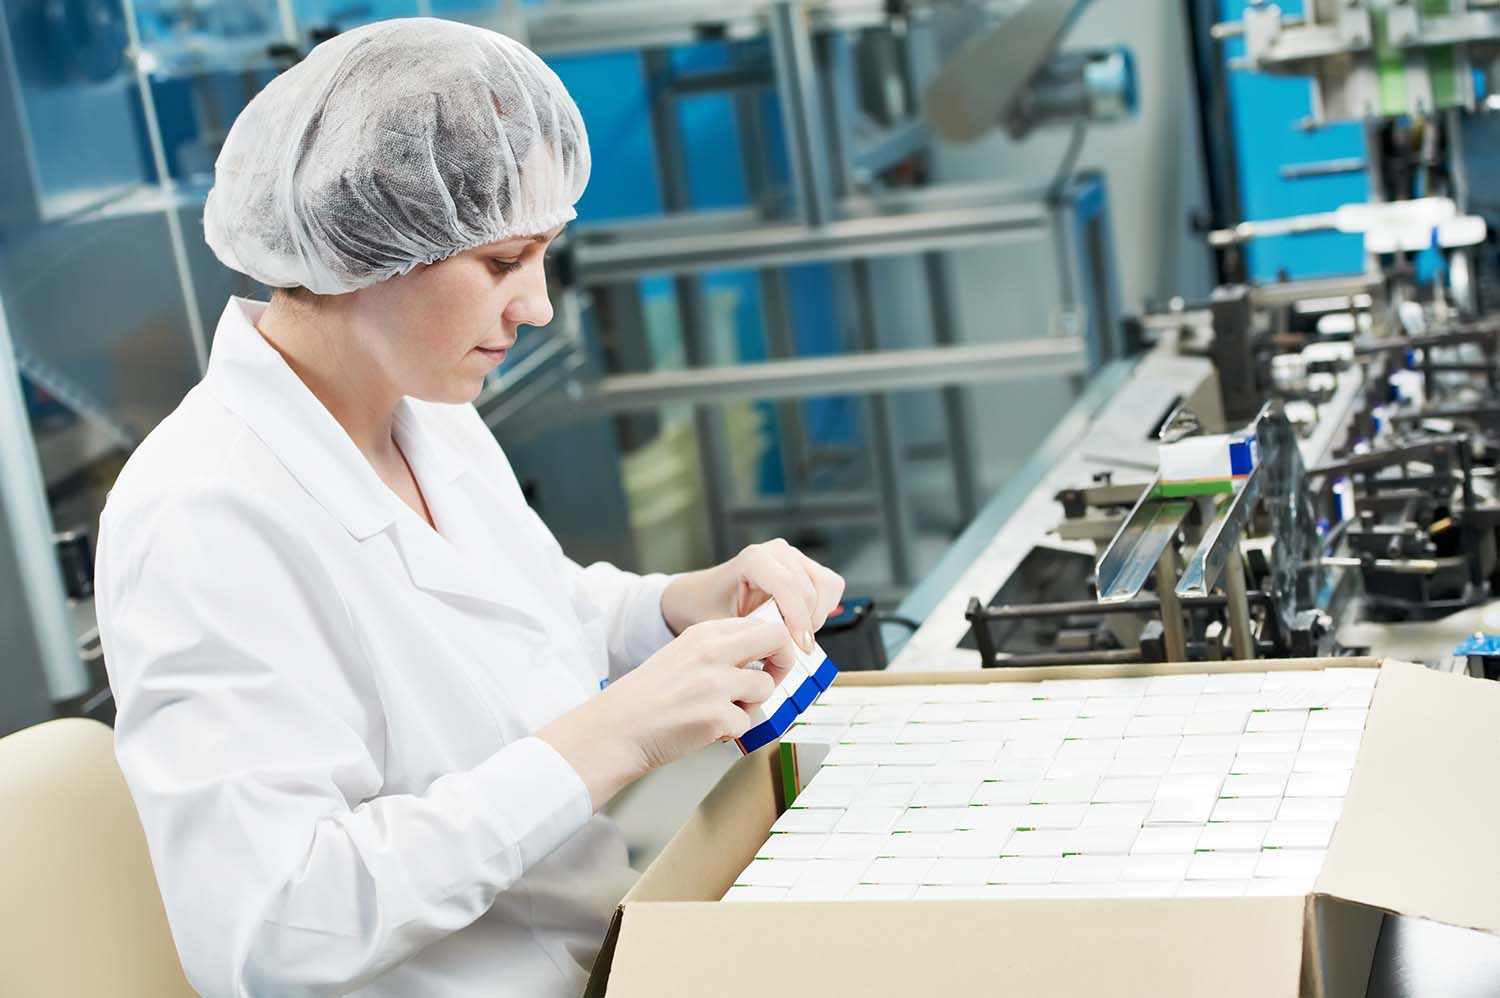 Worker packing eliquid at manufacturing facility.